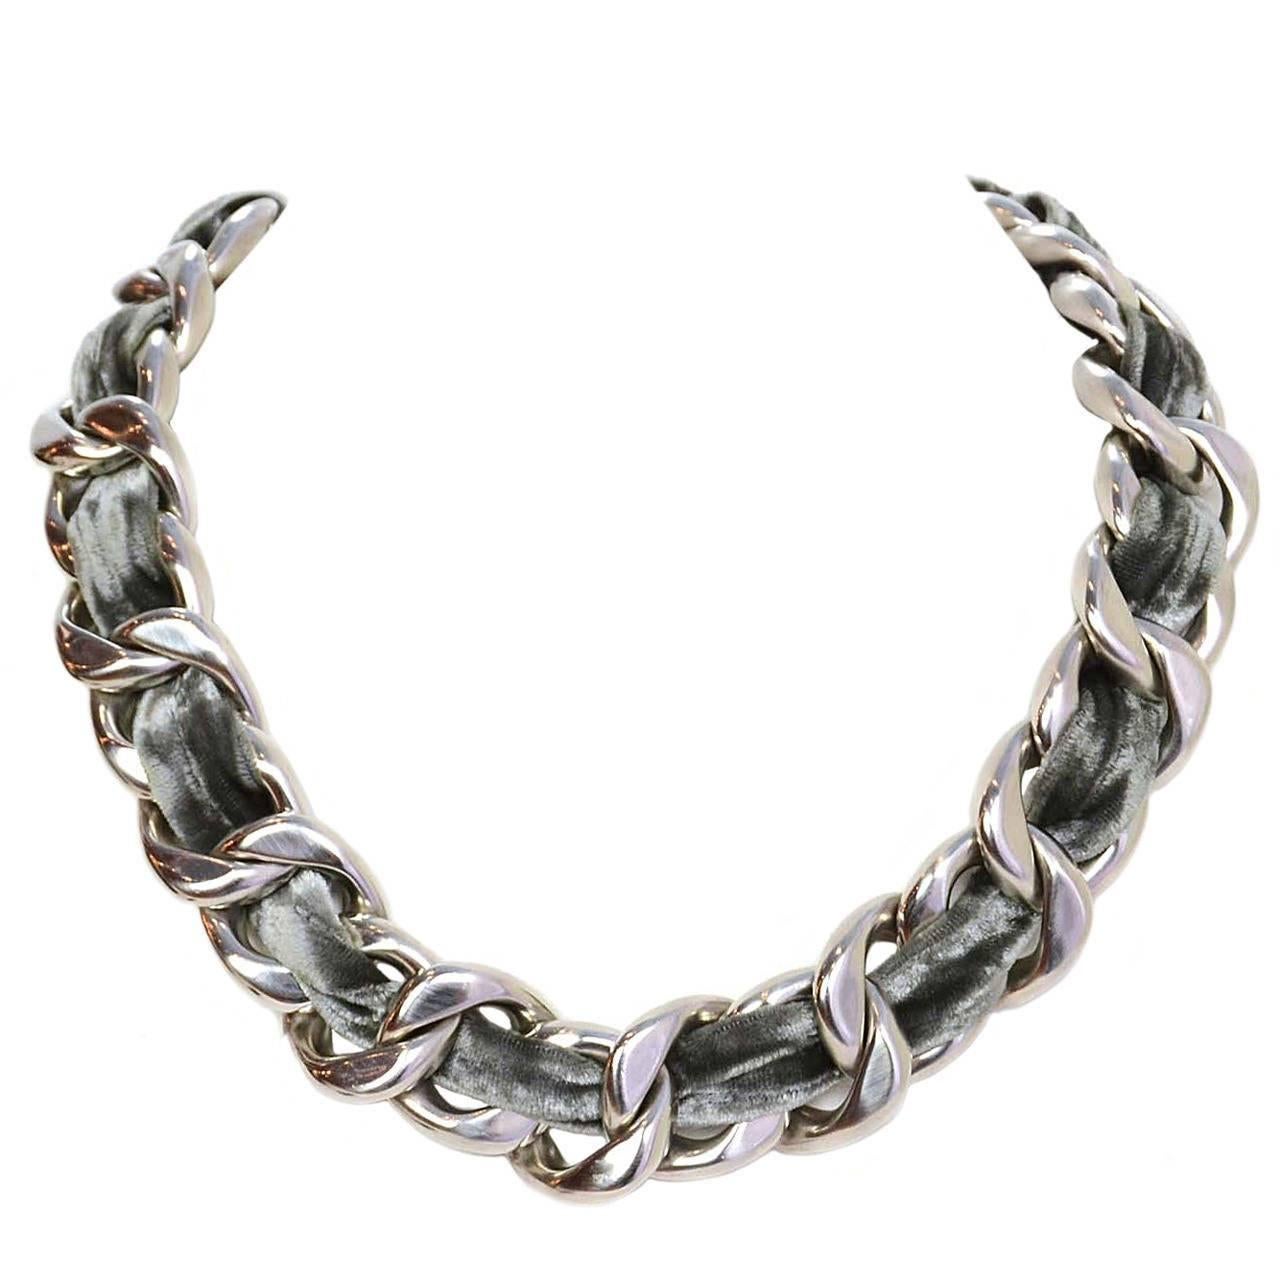 CHANEL Grey Velvet Woven Silver Oversized Chain Link Necklace